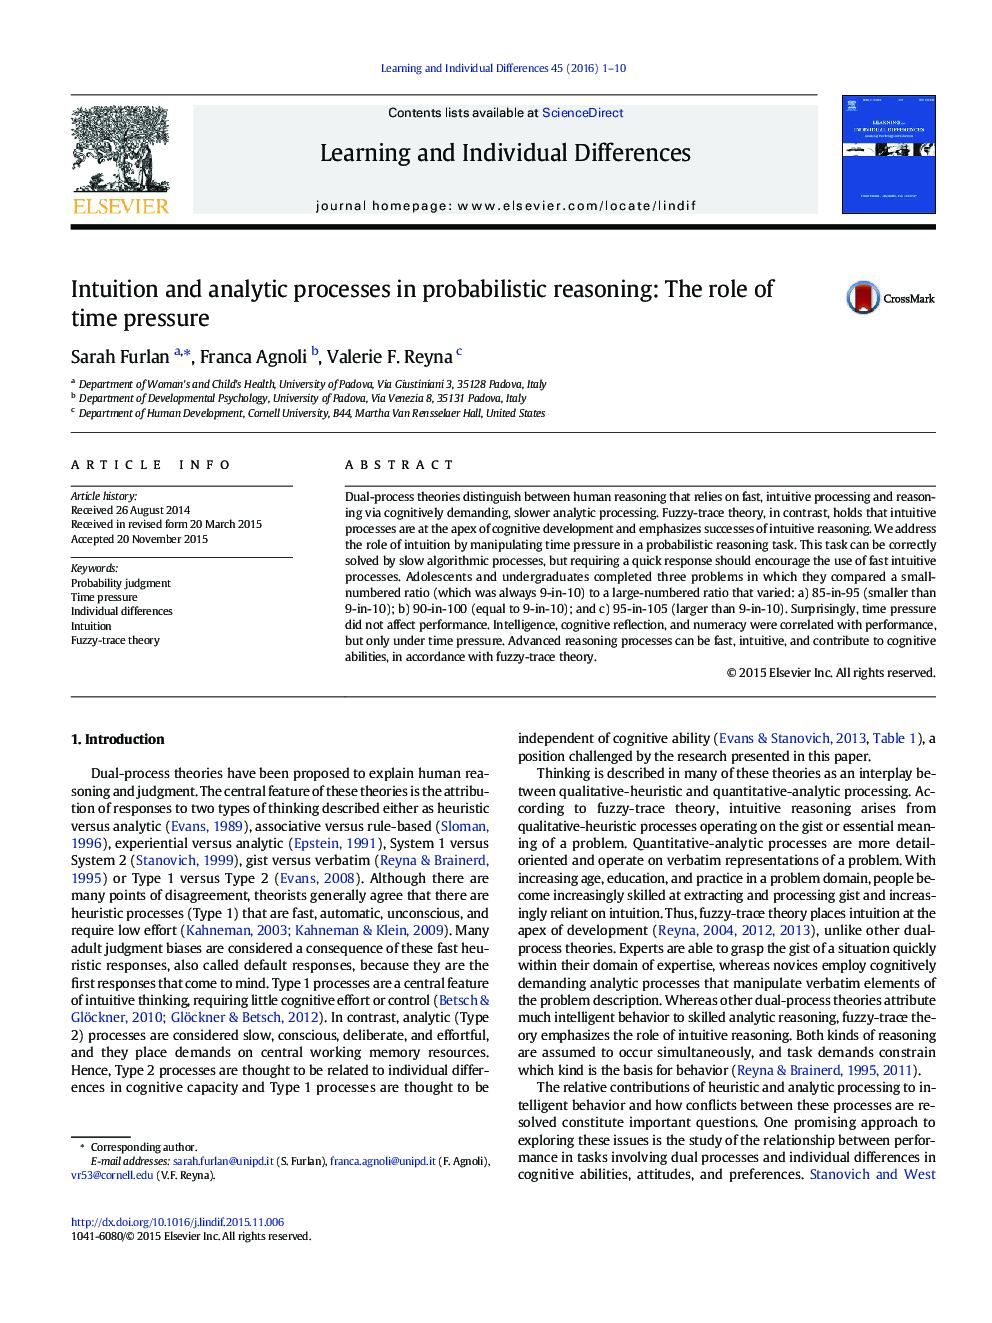 Intuition and analytic processes in probabilistic reasoning: The role of time pressure